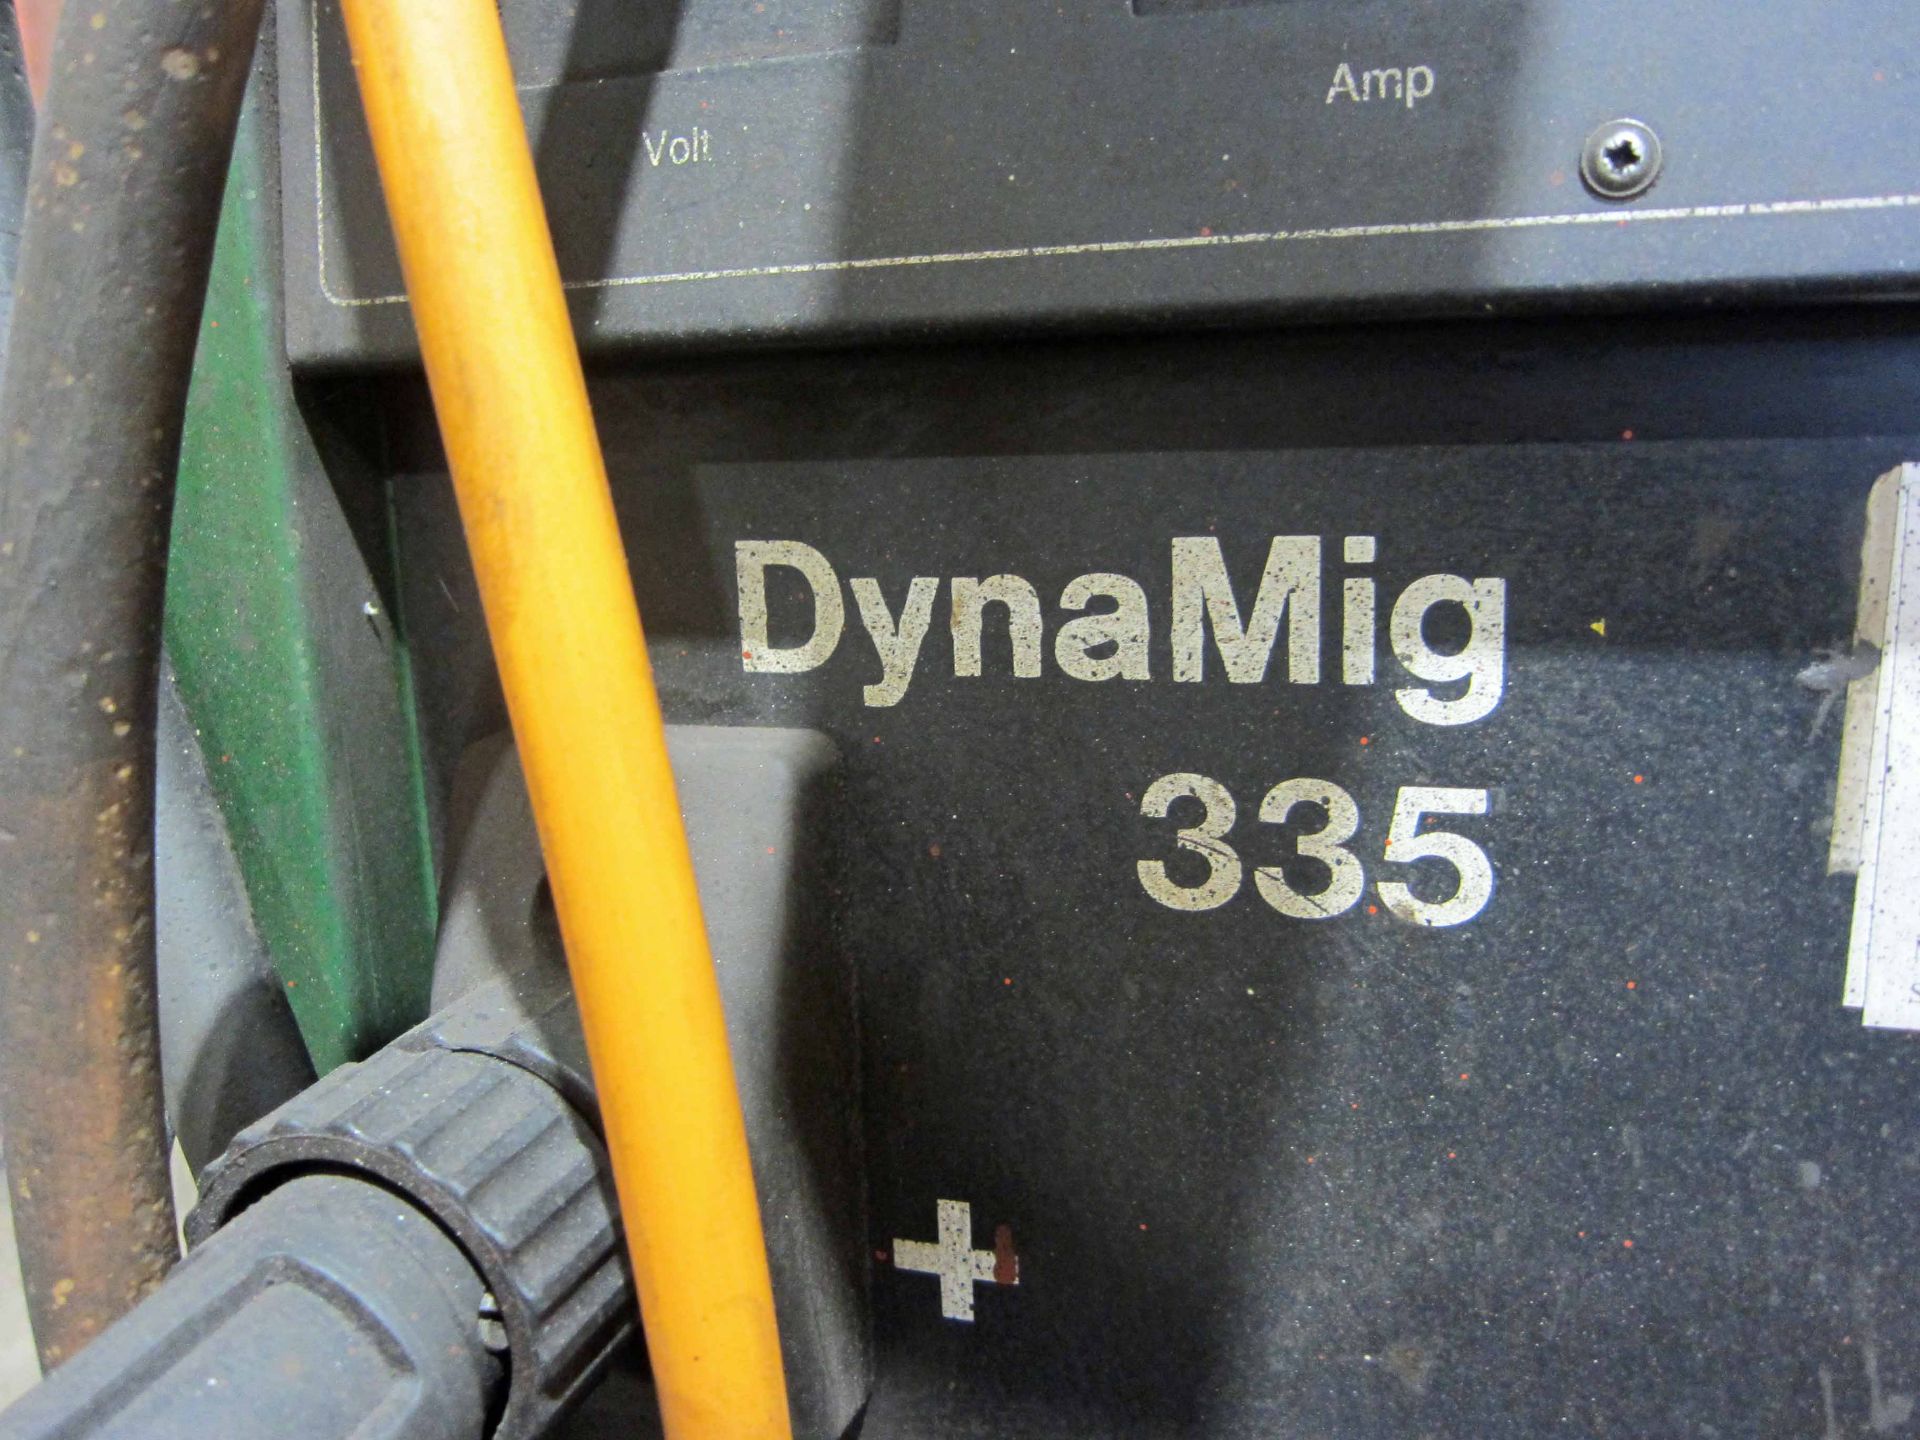 A MIGTRONIC Model Dyna Mig 335 Mig Welder (KDO335) complete with QUALITRONICS Voltage and Amp and - Bild 5 aus 7